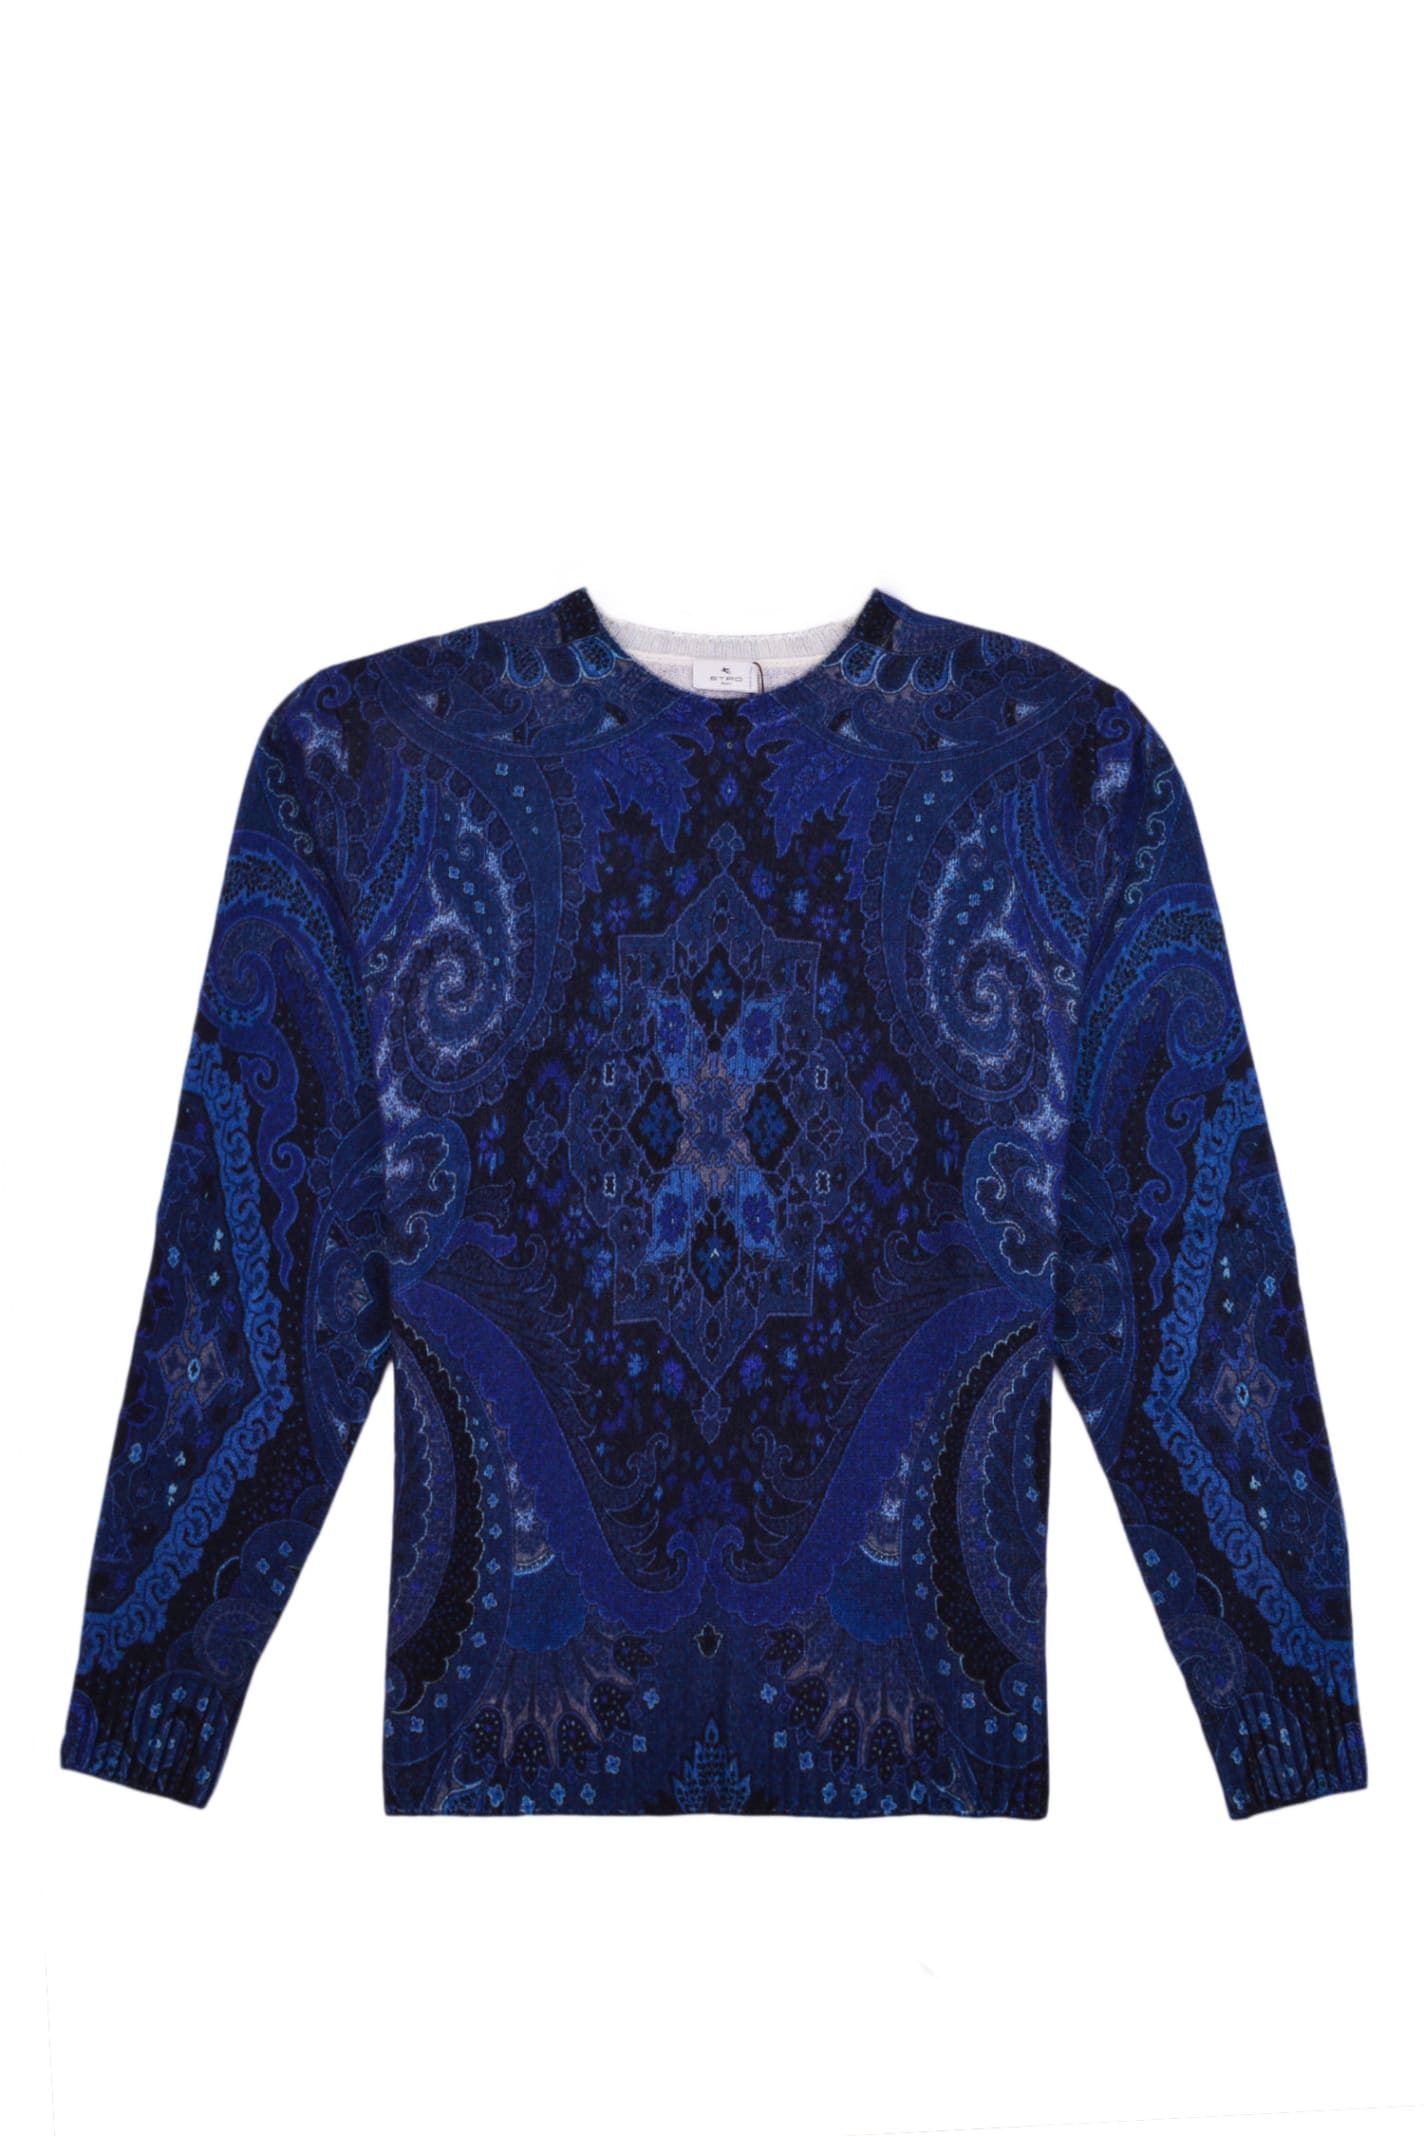 Etro Sweater With Paisley Print